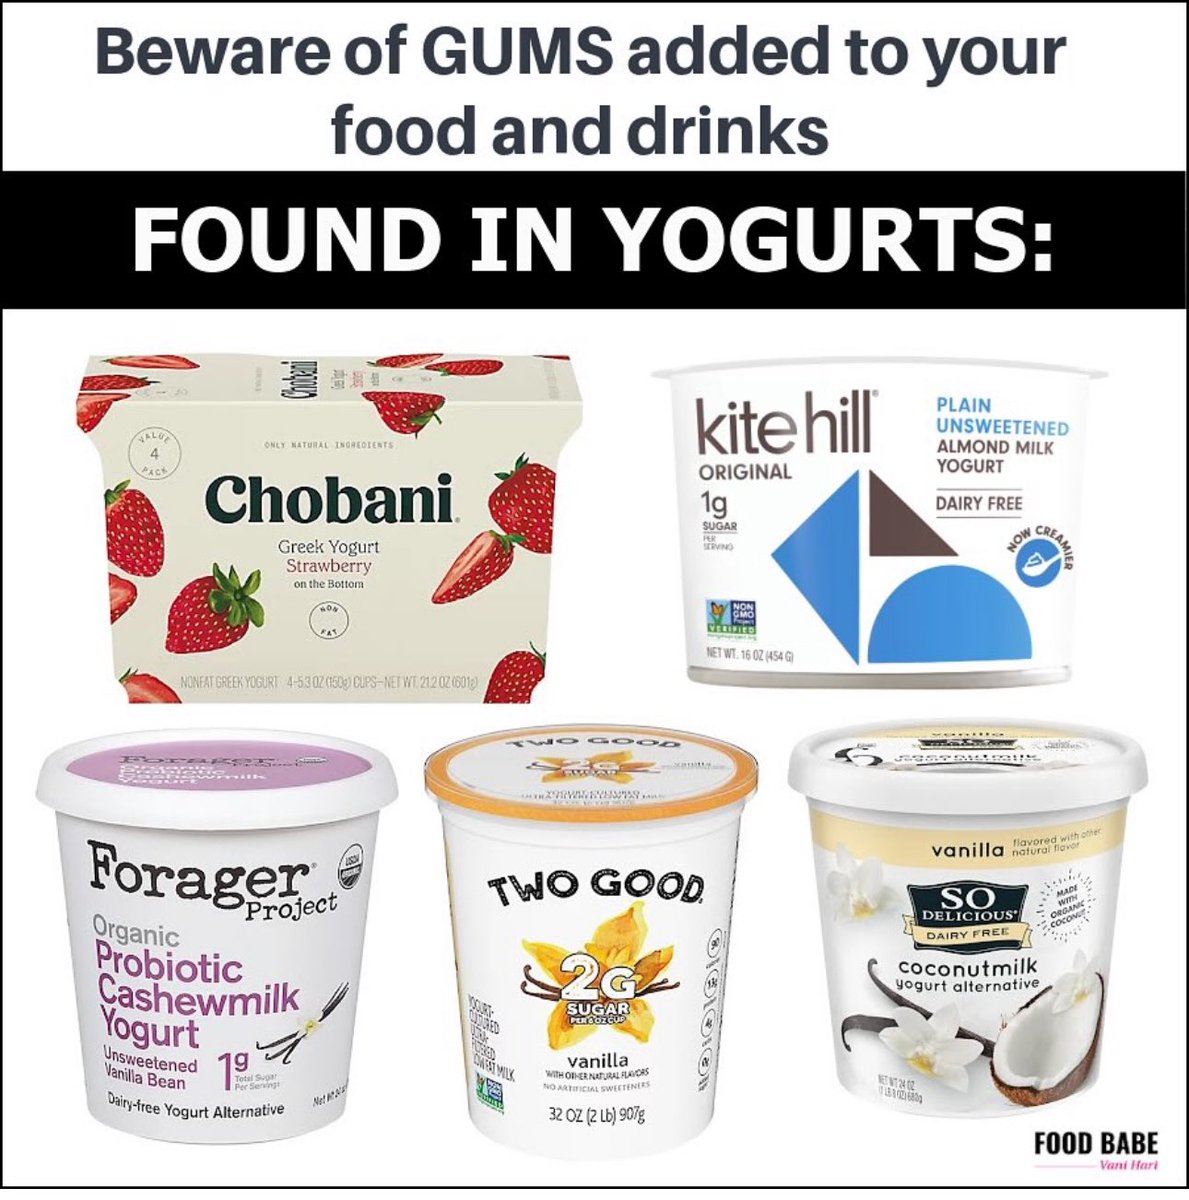 Yogurt is a GREAT source of protein and a satiating snack. Just watch out for additives like gums & emulsifiers + added sugars. #yogurtswaps #readthelabels 🧐